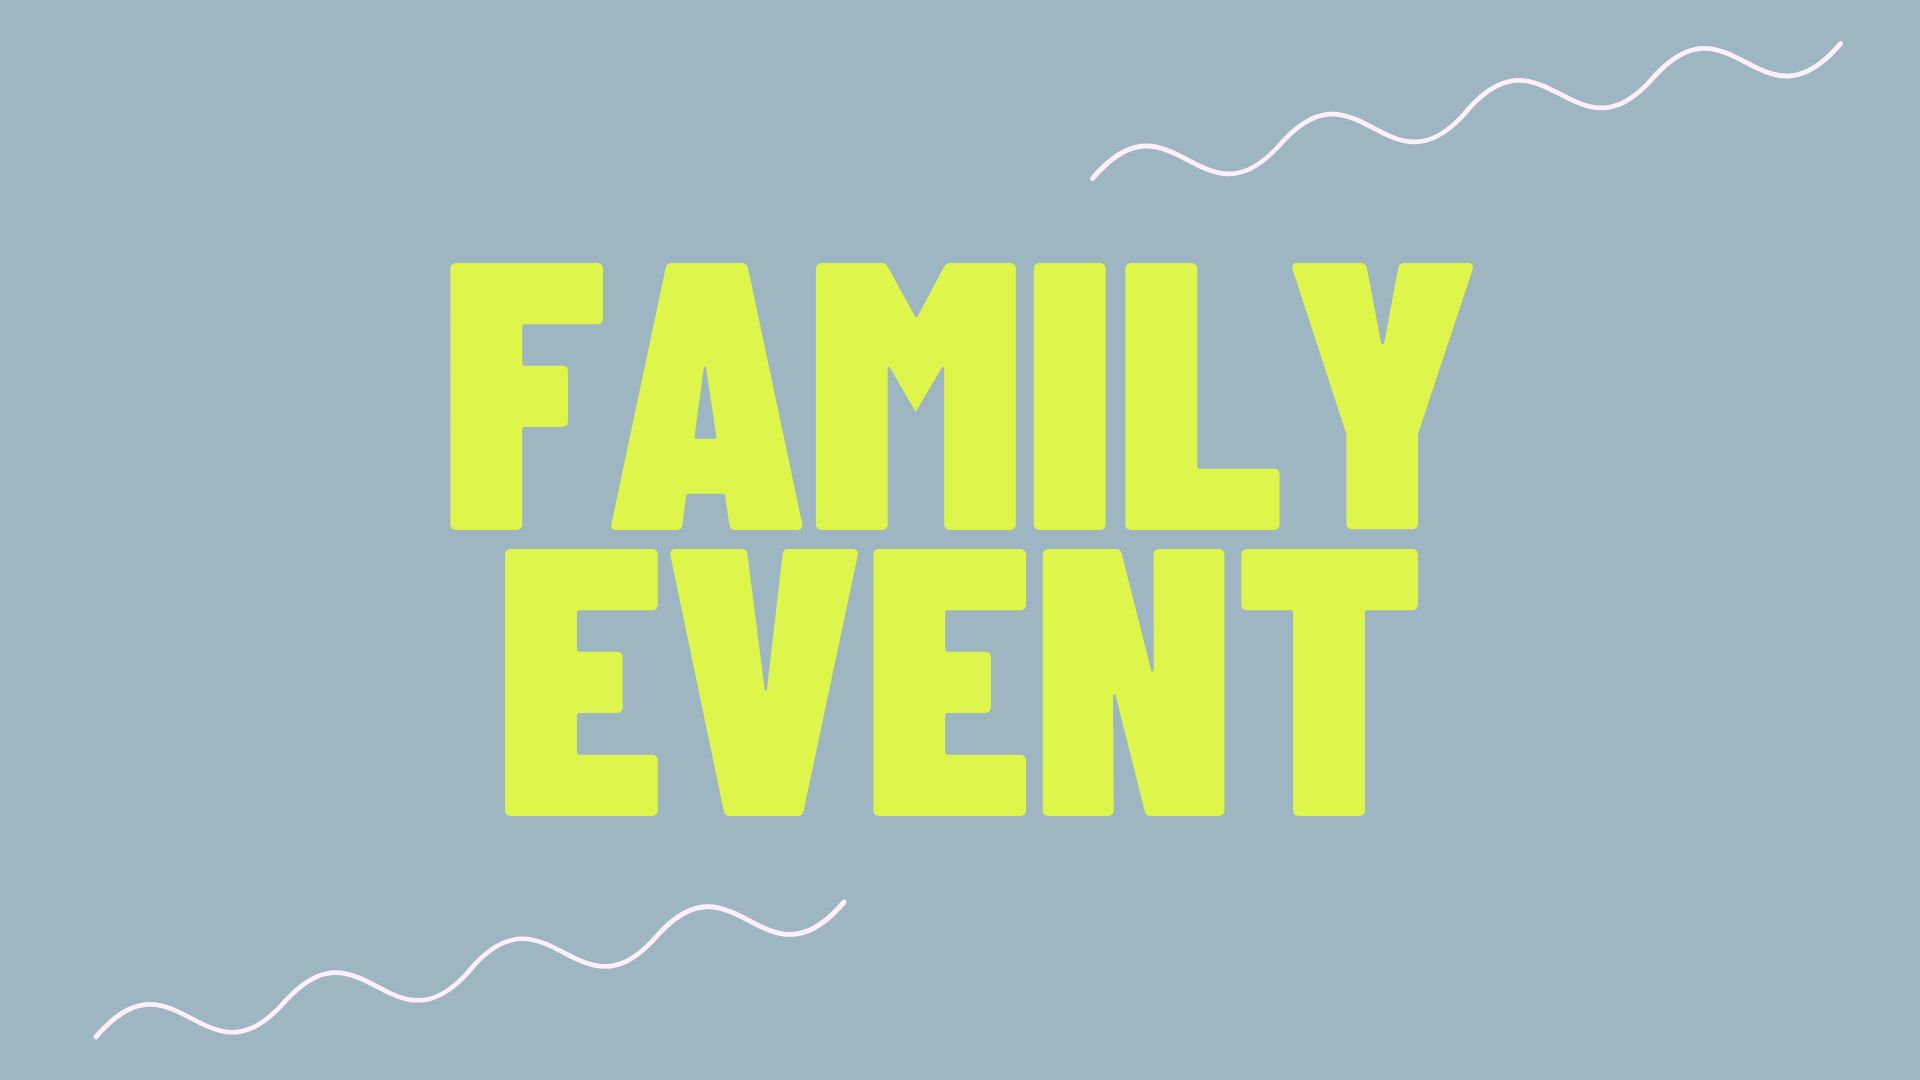 Family event image